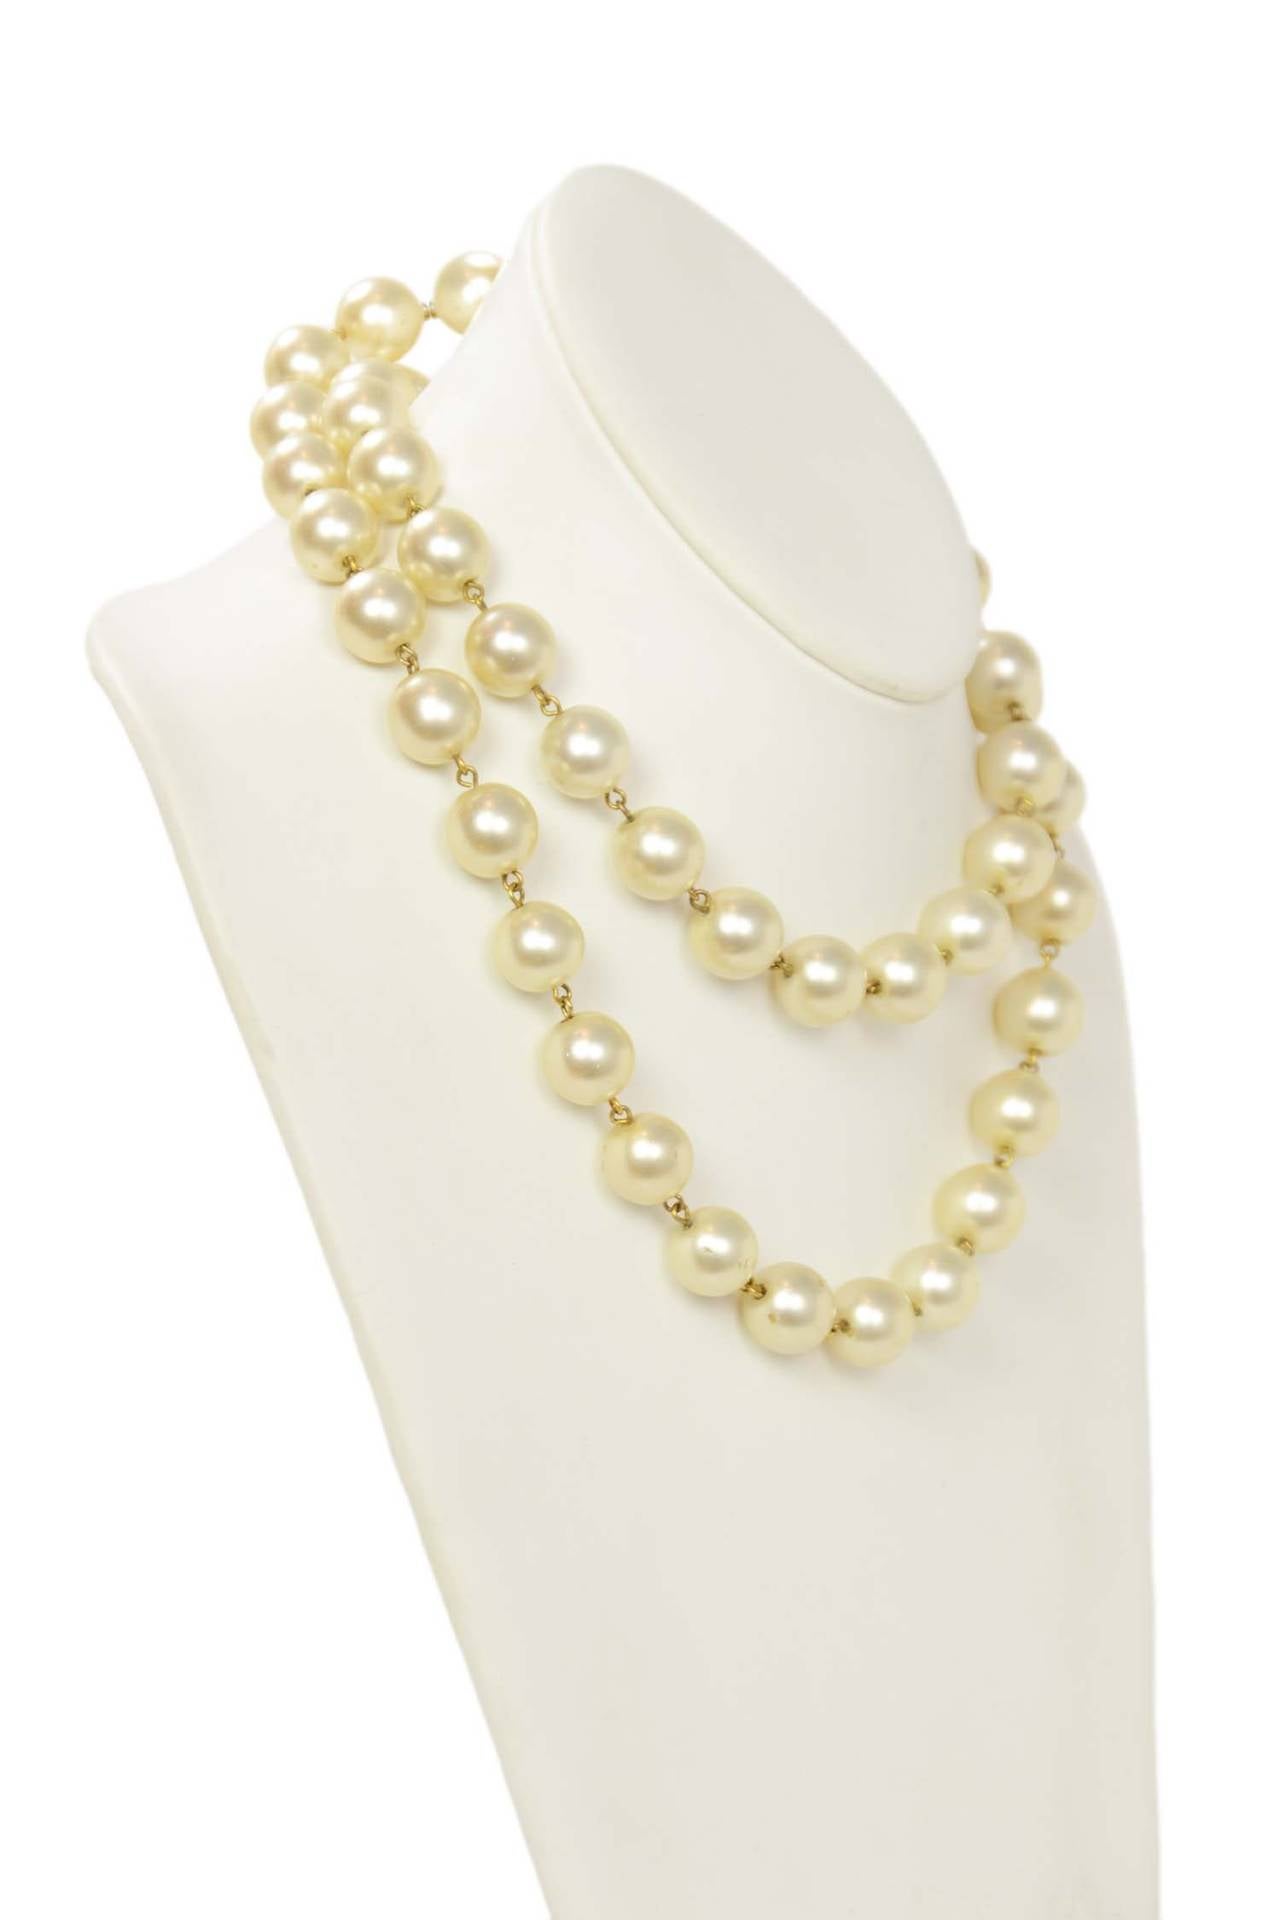 CHANEL Vintage 1990-1992 Pearl Necklace/Belt w/Gold Star Pendant In Excellent Condition In New York, NY